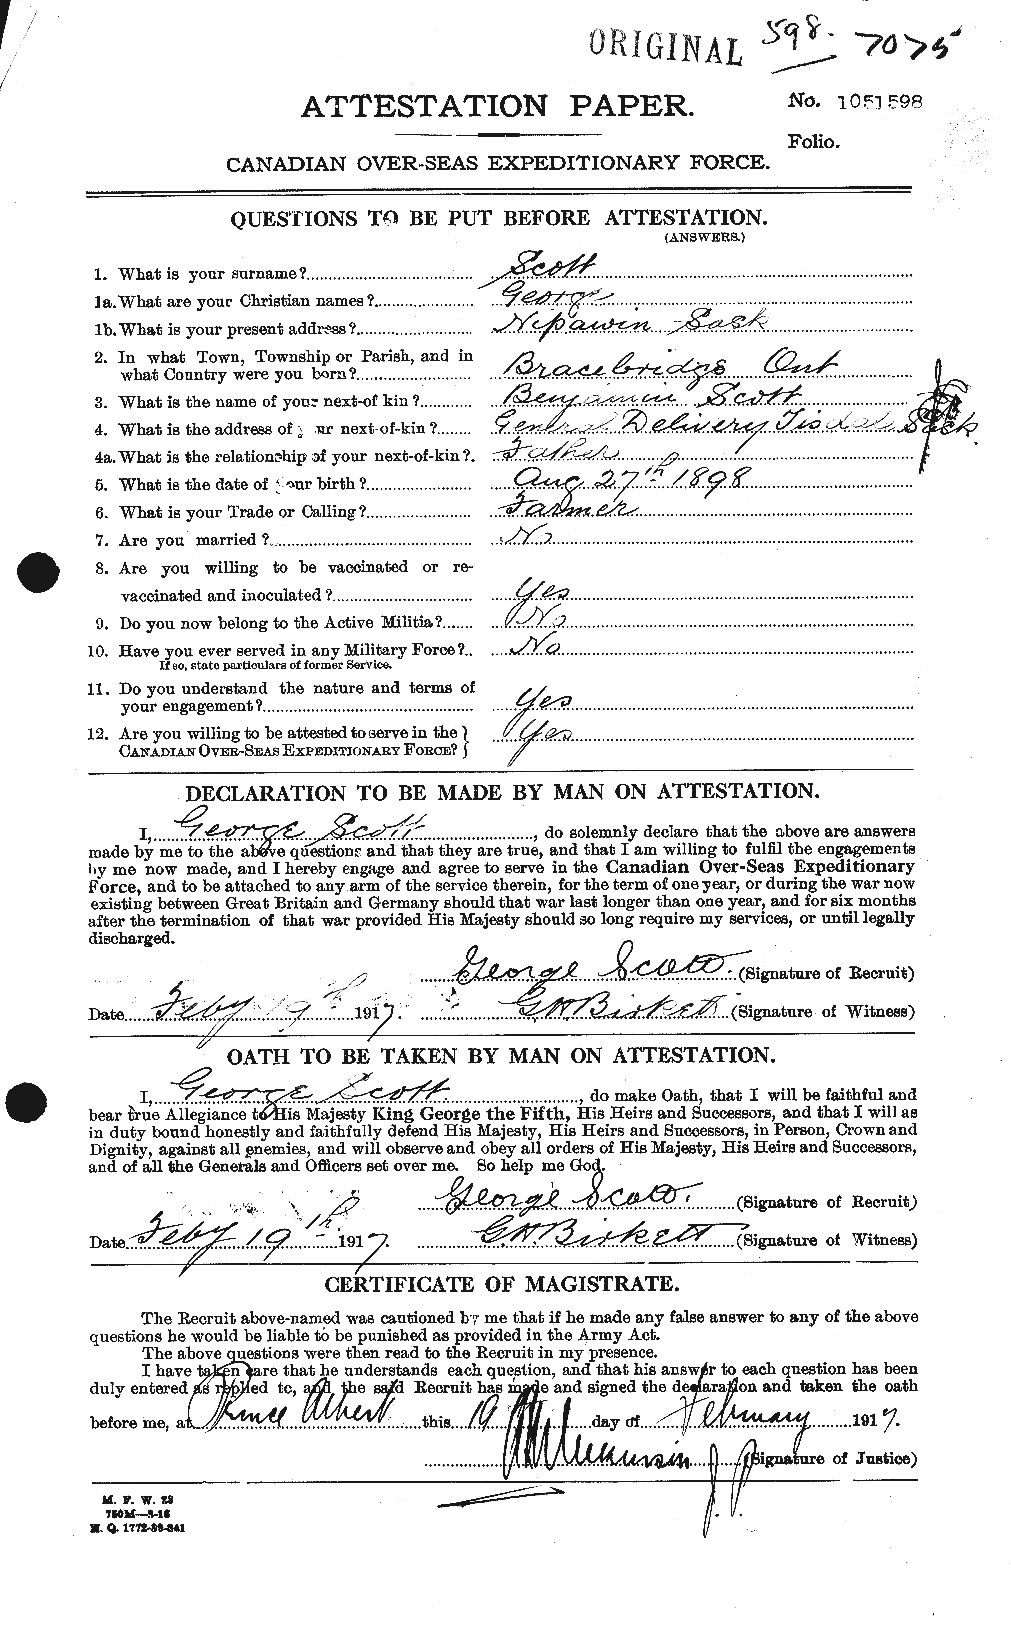 Personnel Records of the First World War - CEF 083585a